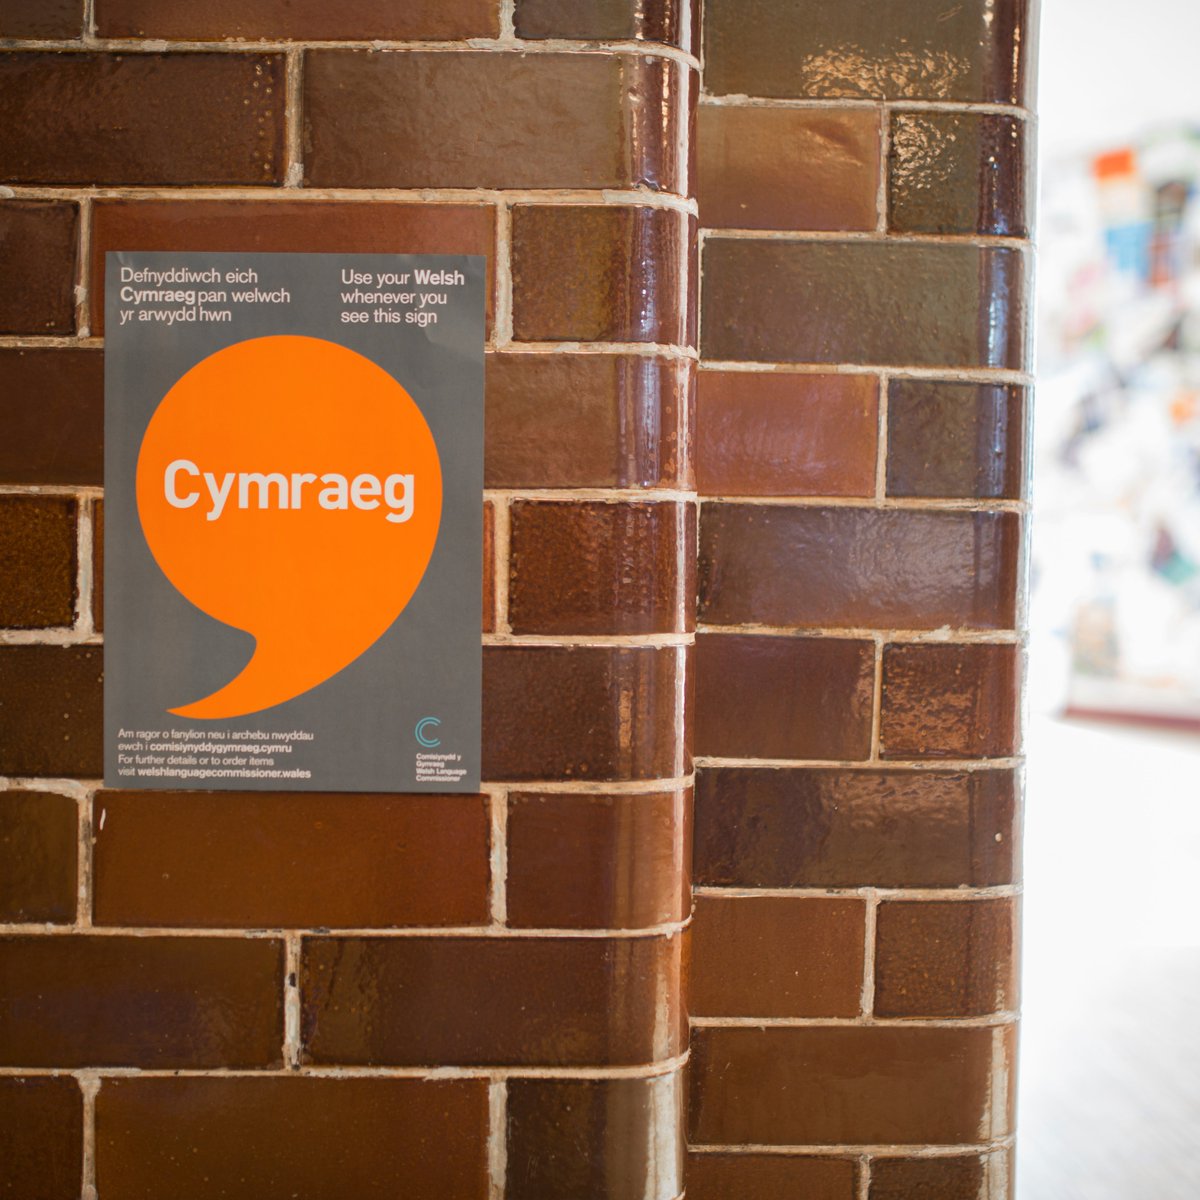 Have you heard announcements in Welsh over the tannoy or self-checkout at your local supermarket? 😍 That's because businesses and charities in Wales are helping us grow the use of our language. Let’s use whatever Cymraeg we have, wherever we can 🙌 #CynnigCymraeg